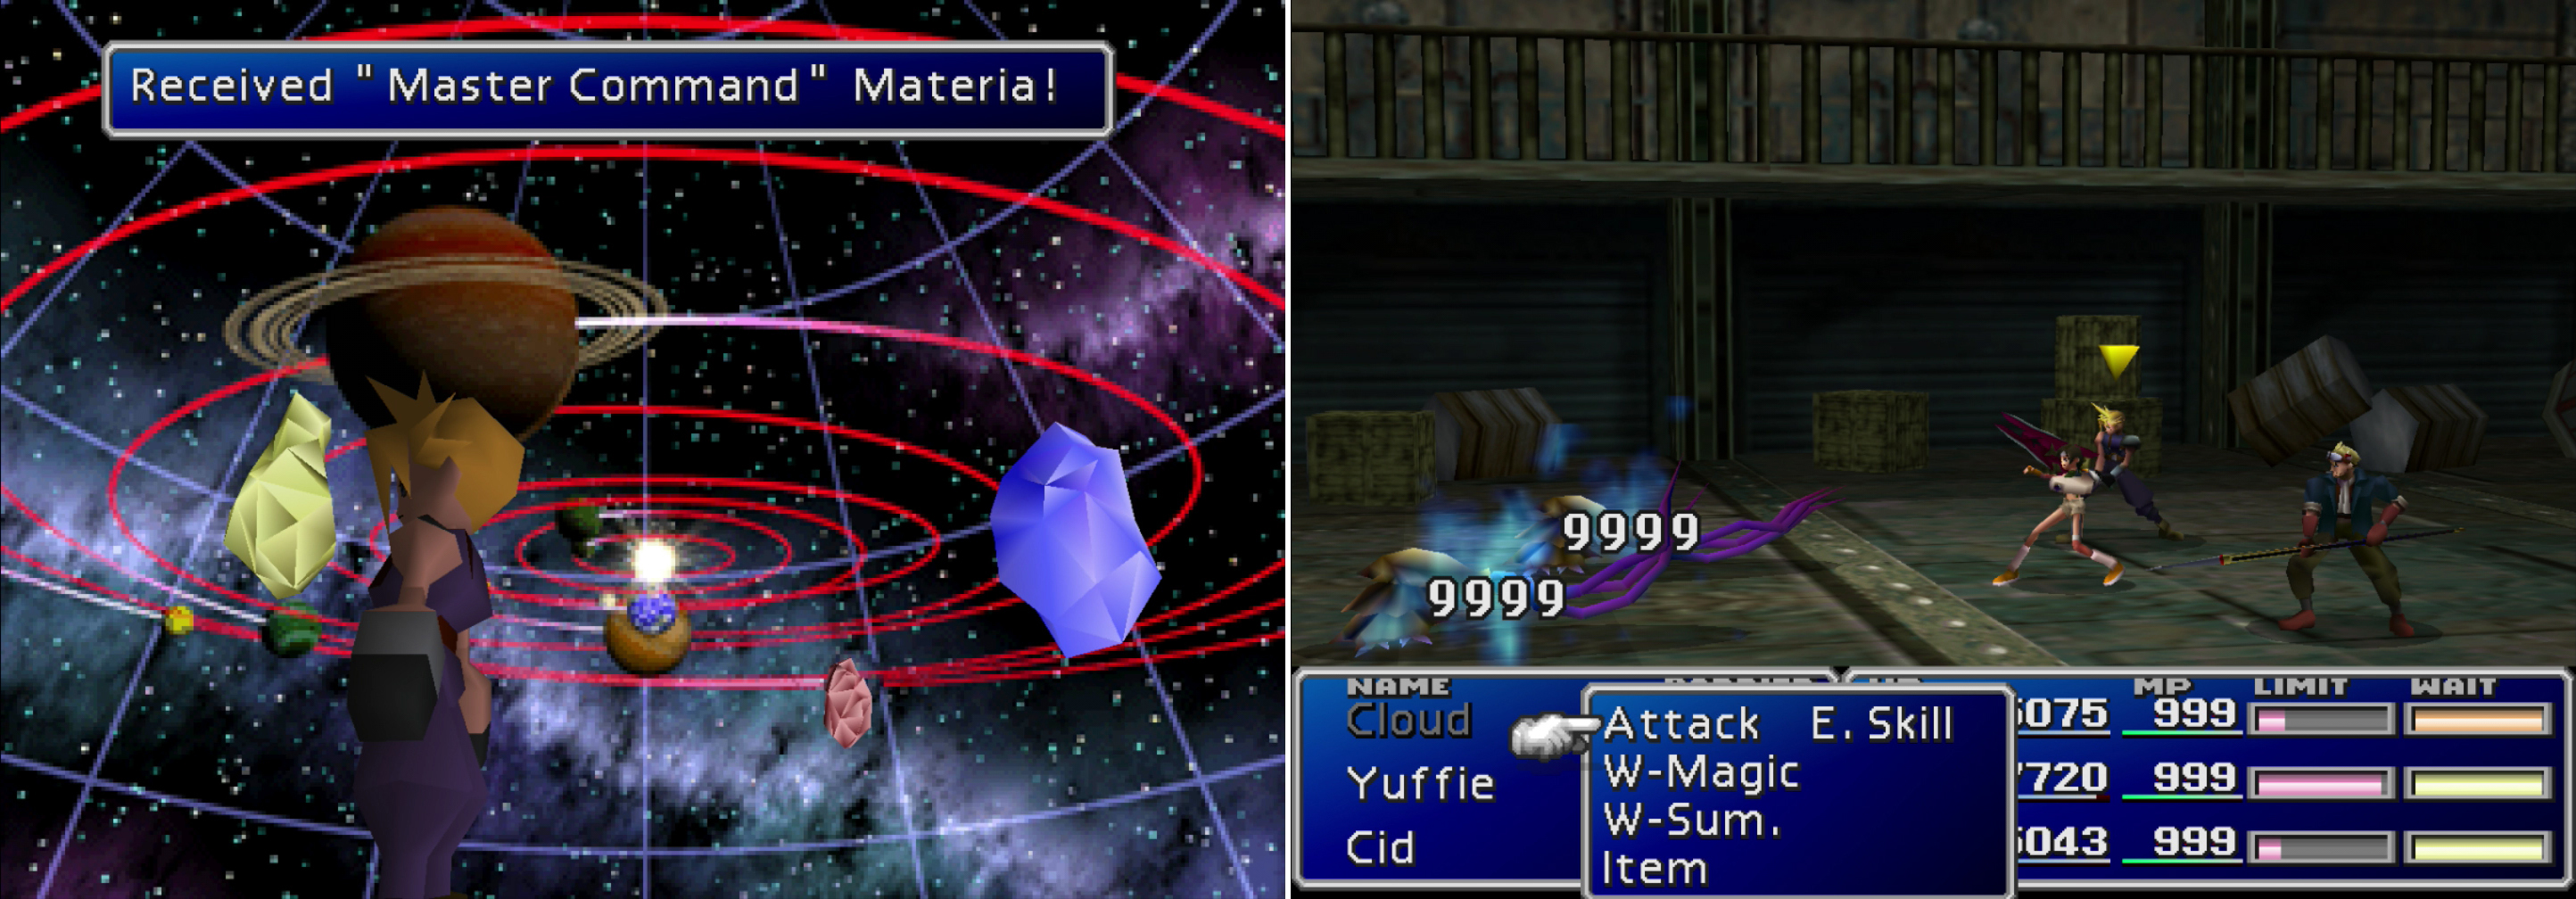 Master one of every type of command, summon or magic materia and you can obtain a piece of Master Materia from the Huge Materia you rescued (left). Yuffie - with her ultimate weapon - the Conformer is in league of her own when it comes to Morphing foes (right).